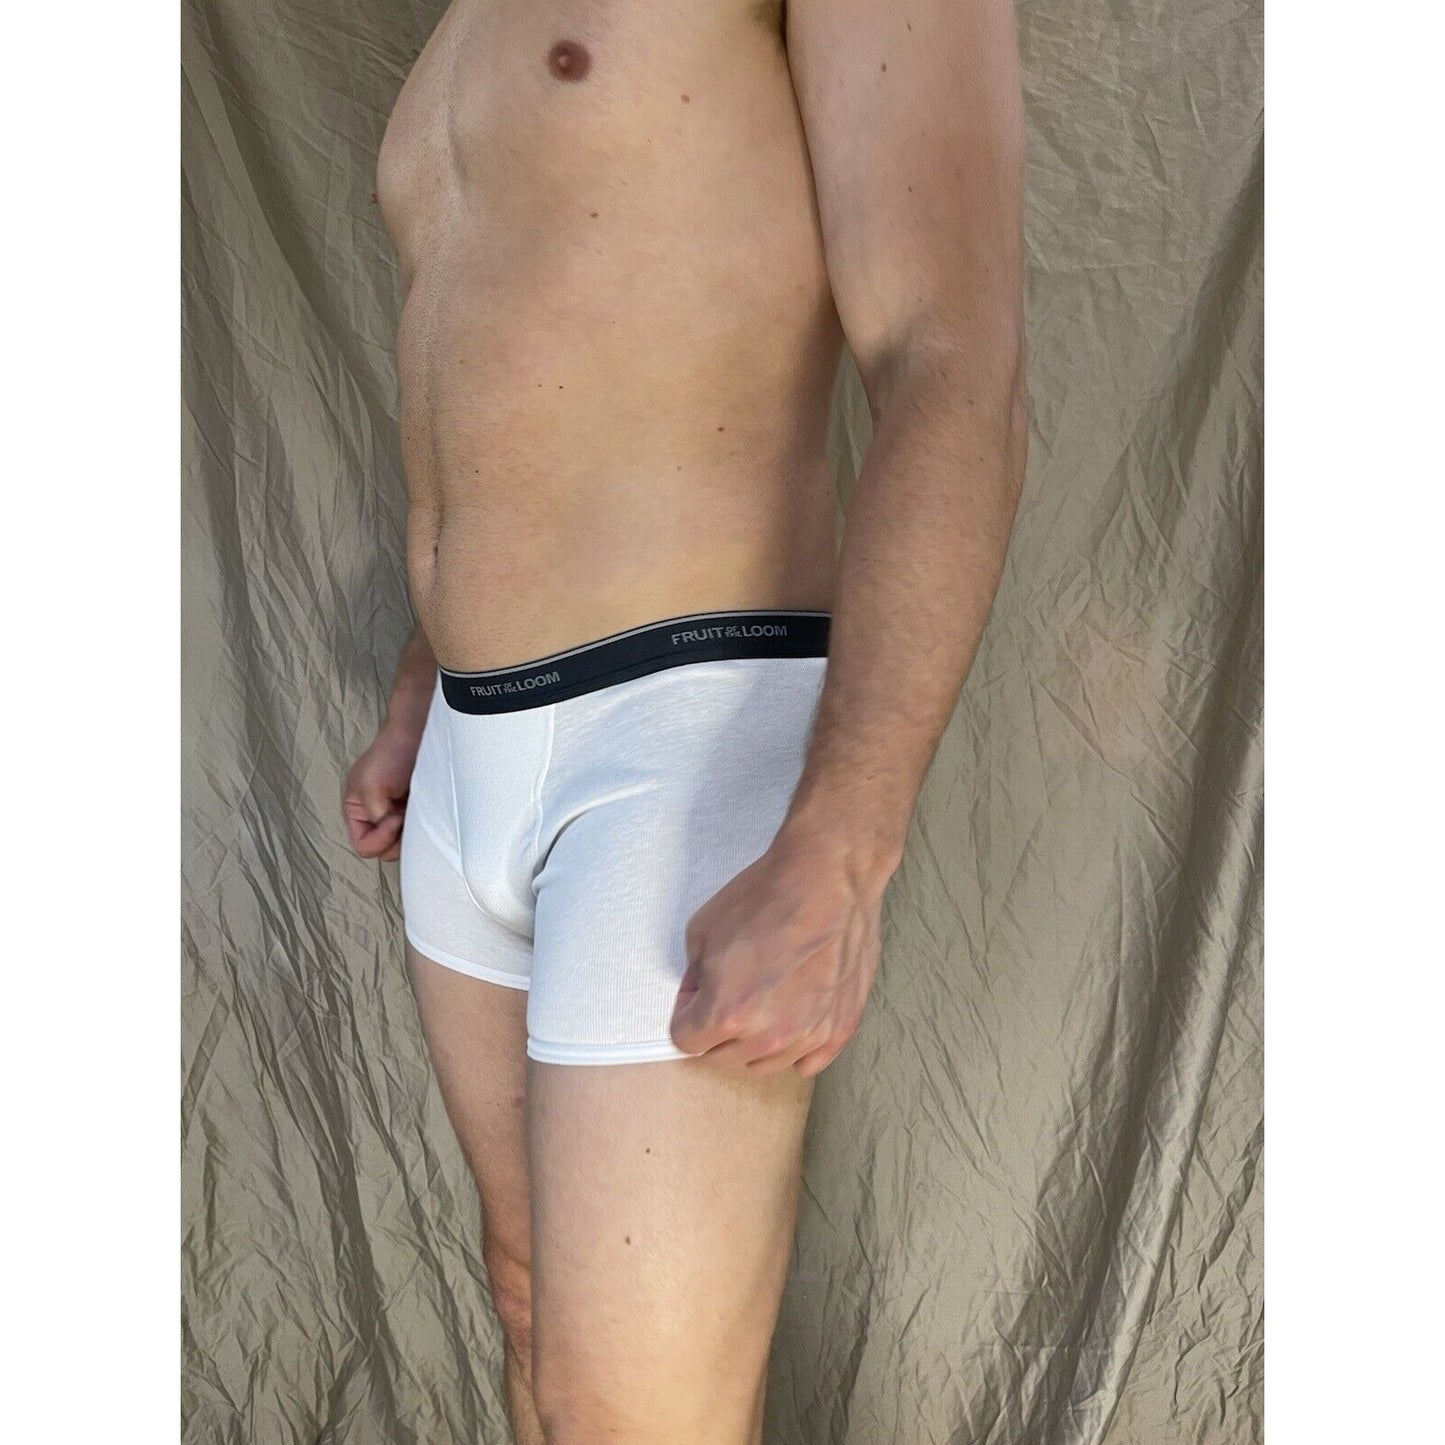 boy's large fruit of the loom boxer brief White